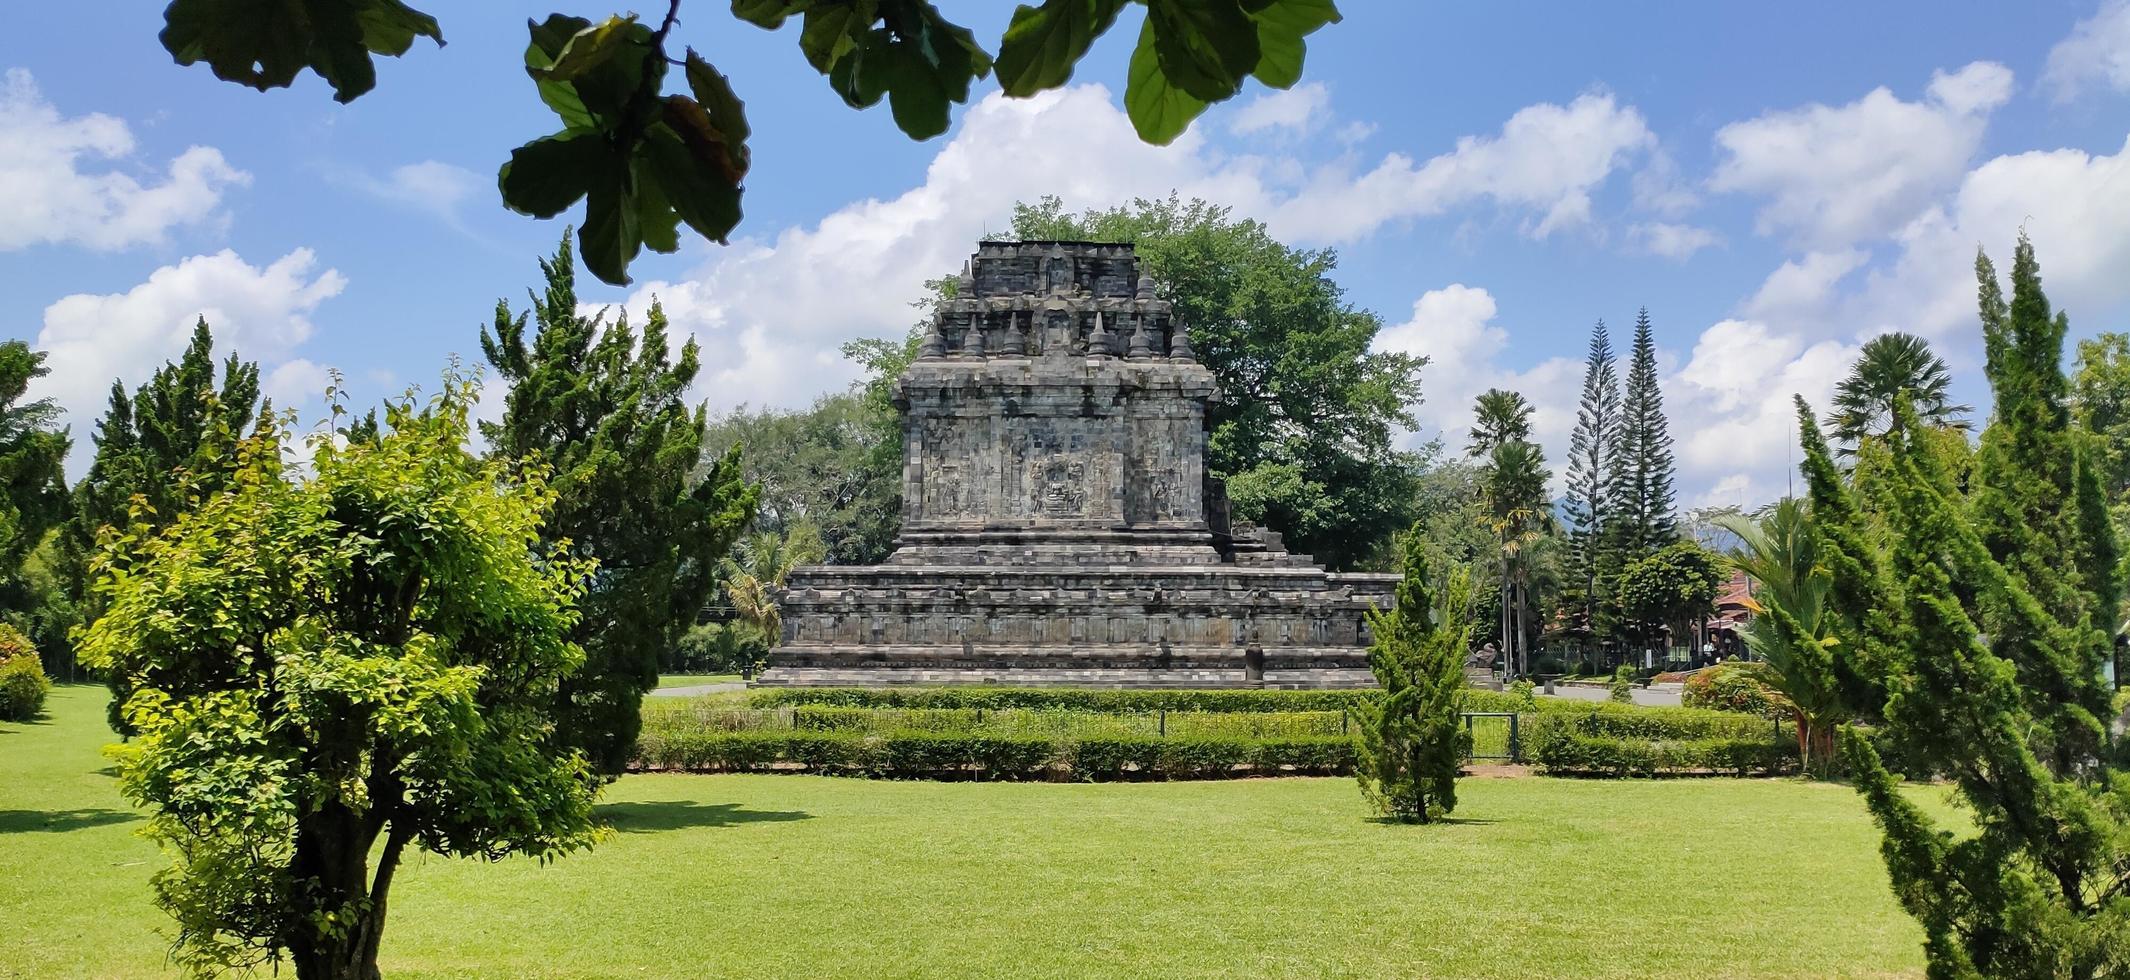 Magelang, Central Java, Indonesia, 2023 - Photo of the beautiful Mendut Temple, a relic of the ancient Mataram Kingdom and Buddhism. For recreation facilities to introduce history